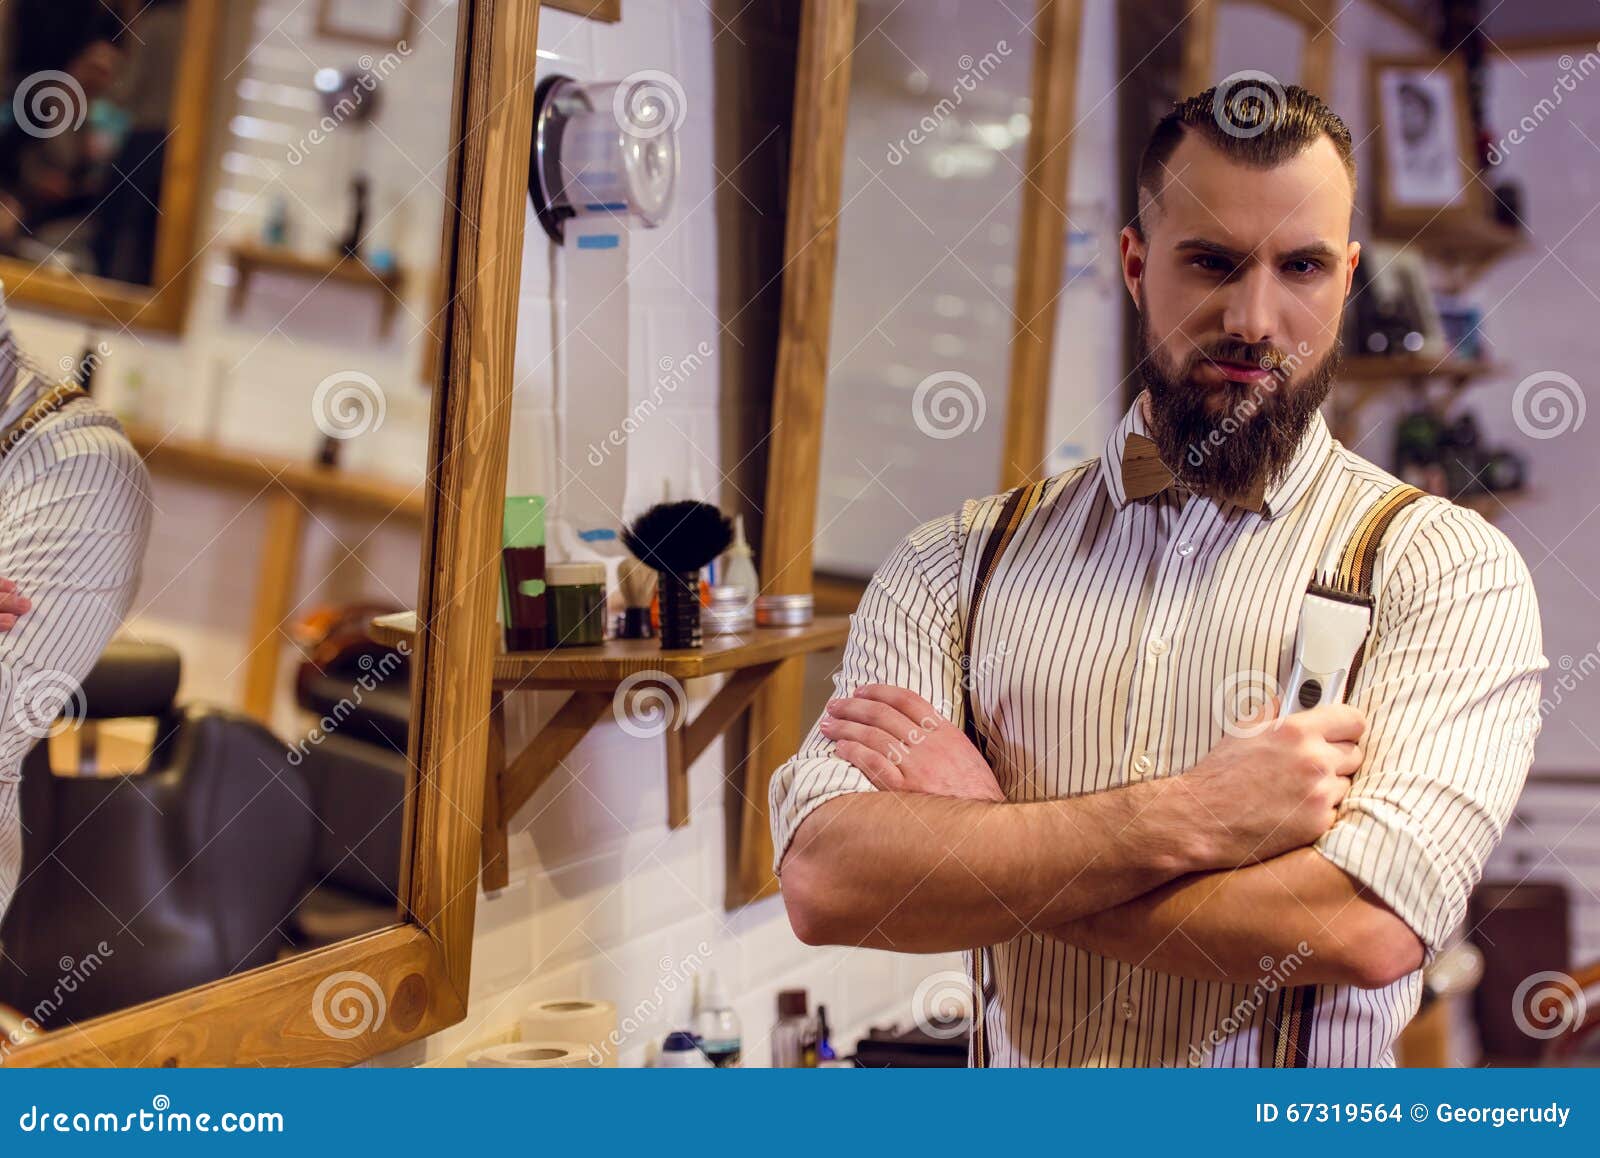 At the barber shop stock photo. Image of attractive, cool - 67319564